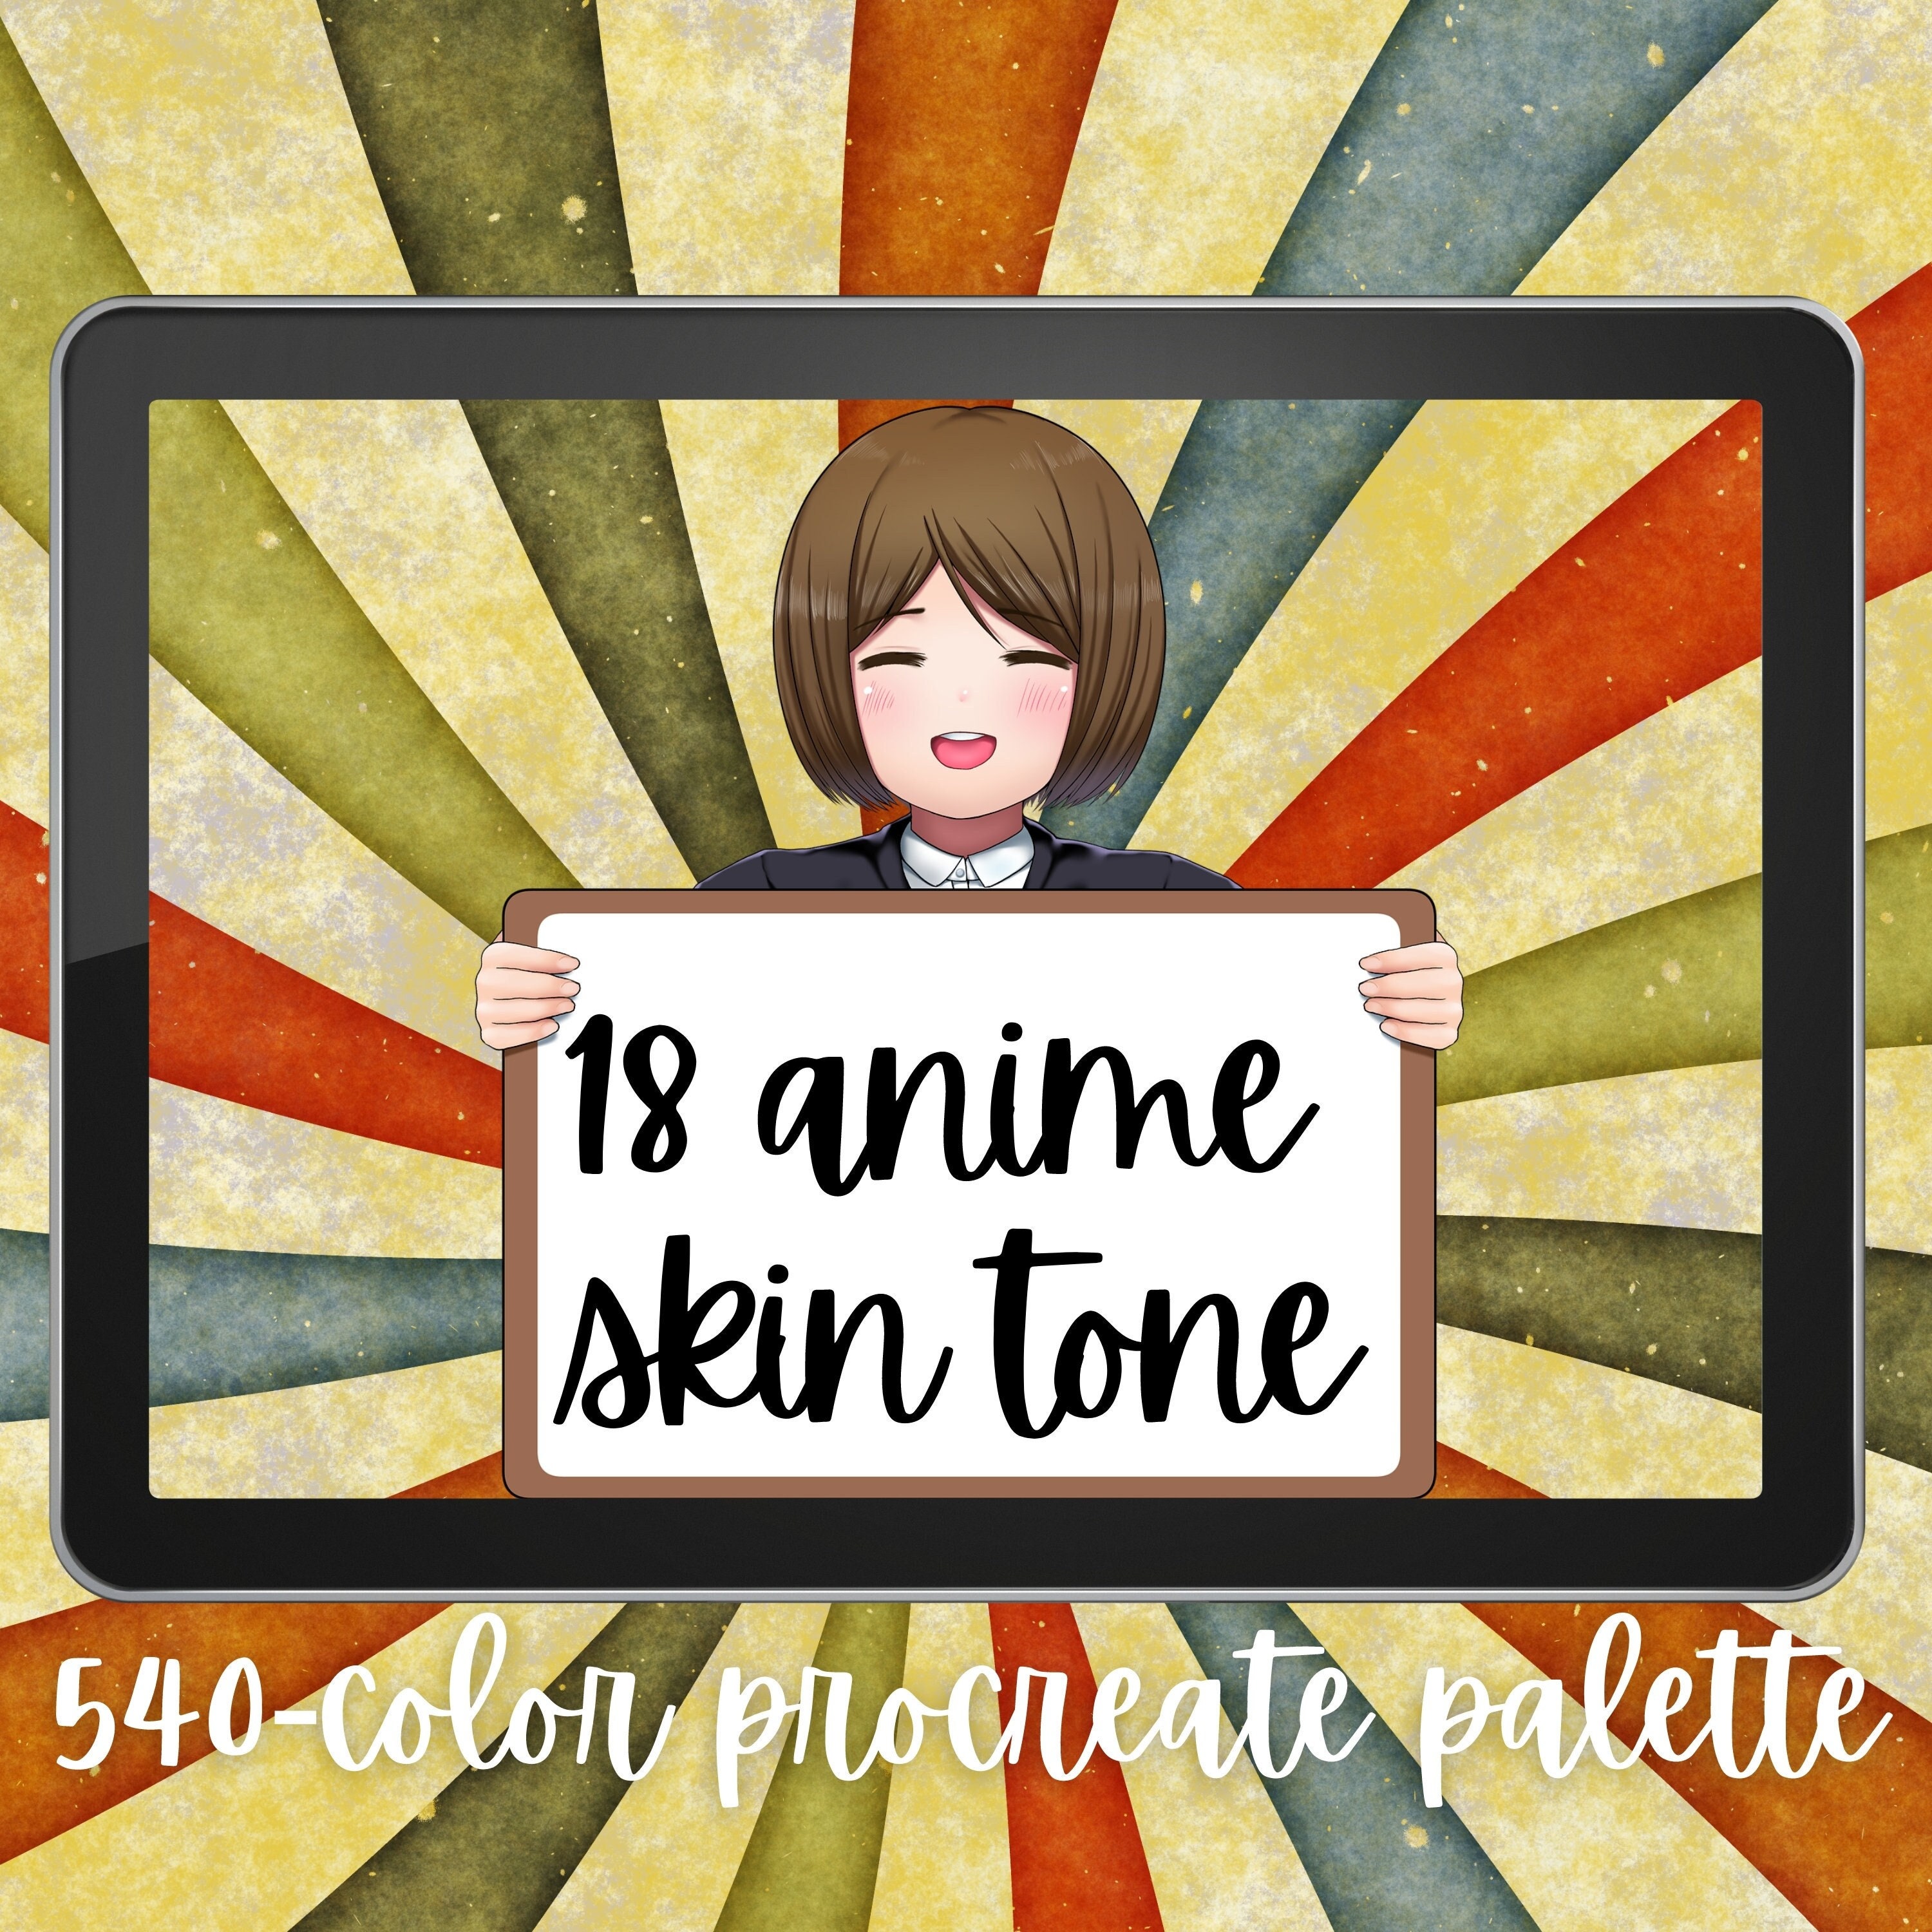 5 Free Skin Tone Collections  Skin Color Palette Procreate  Artsydee   Drawing Painting Craft  Creativity